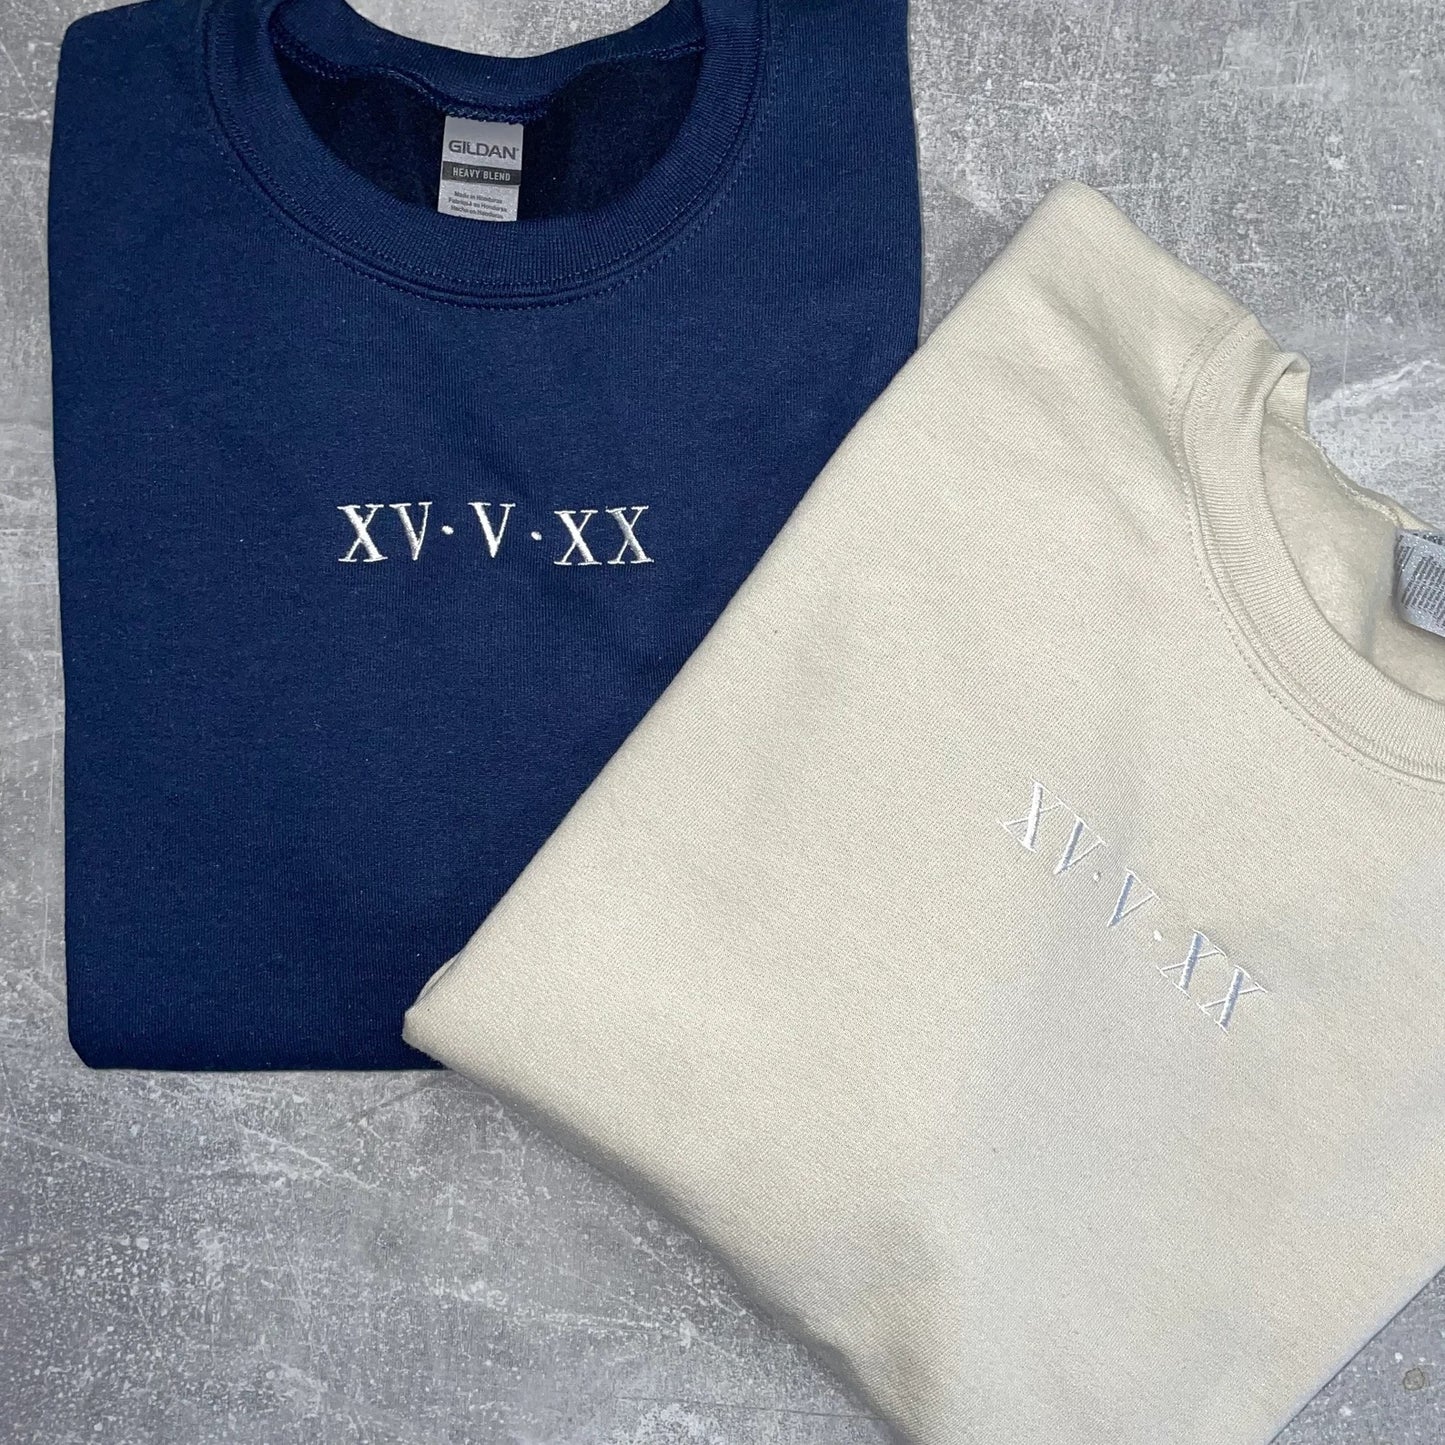 Personalized embroidered Sweatshirt/Hoodie with Roman numerals